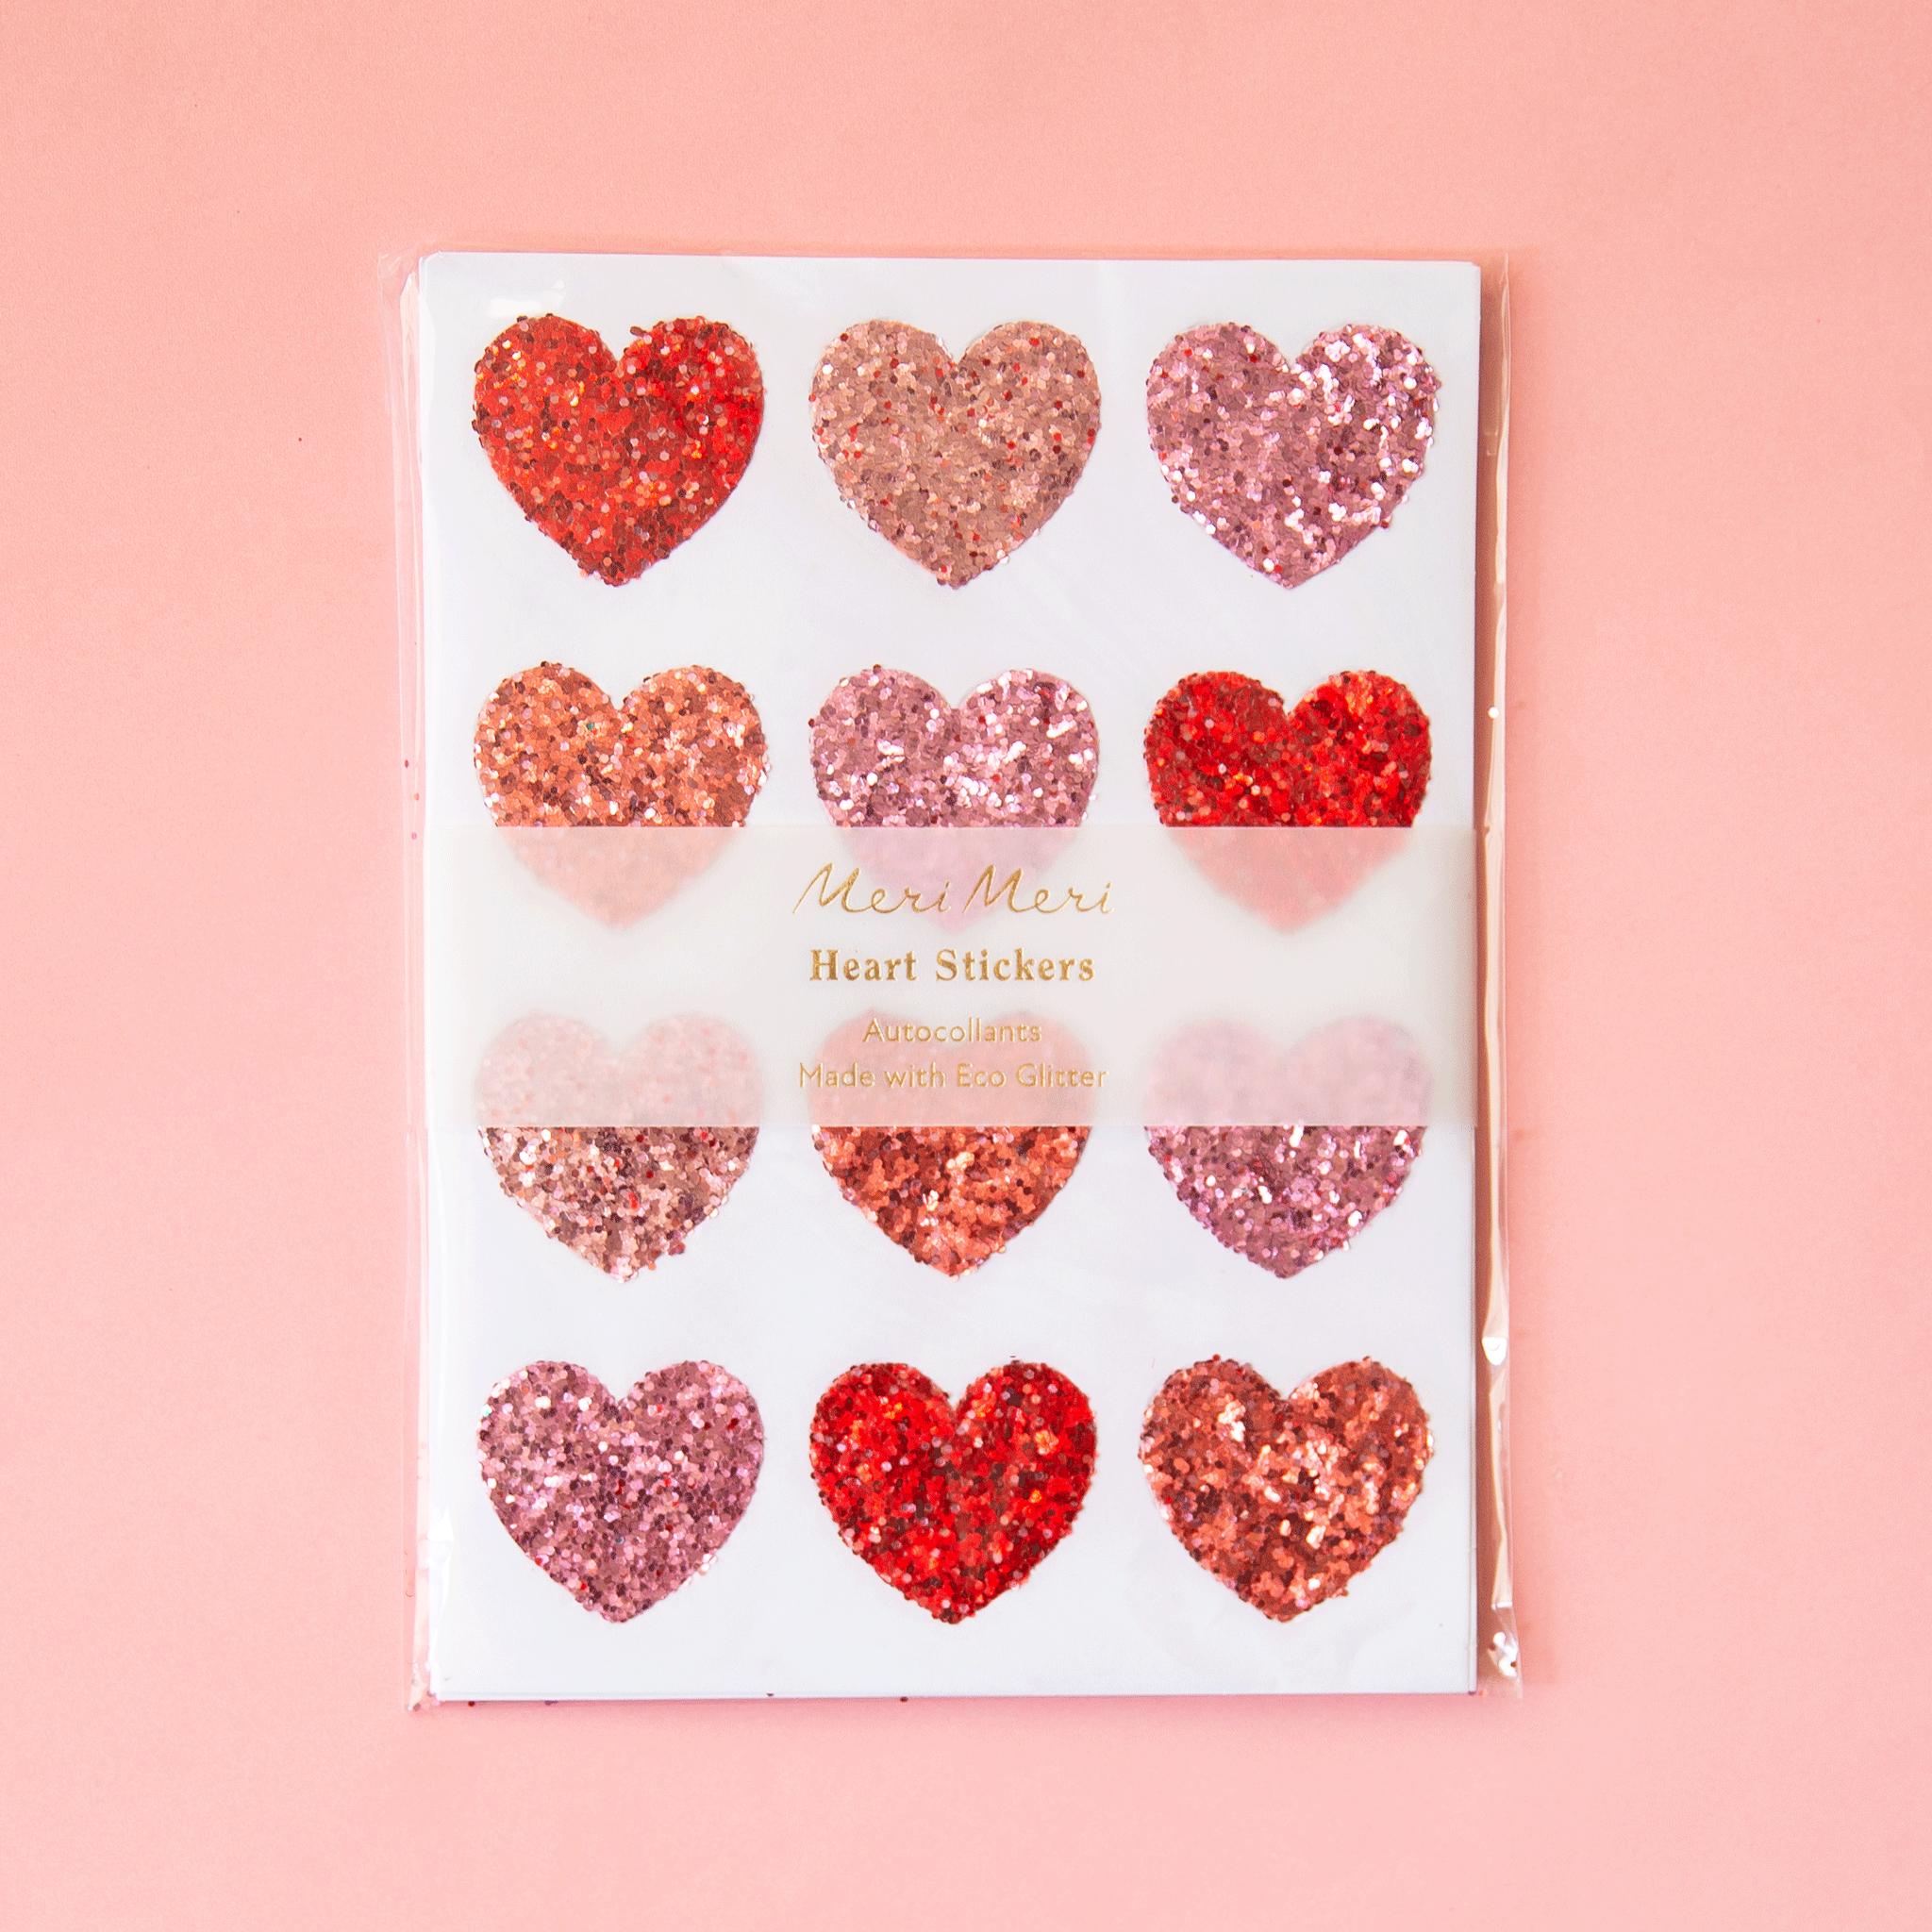 On a pink background is a sheet of heart shaped glitter stickers in shades of red and pink.